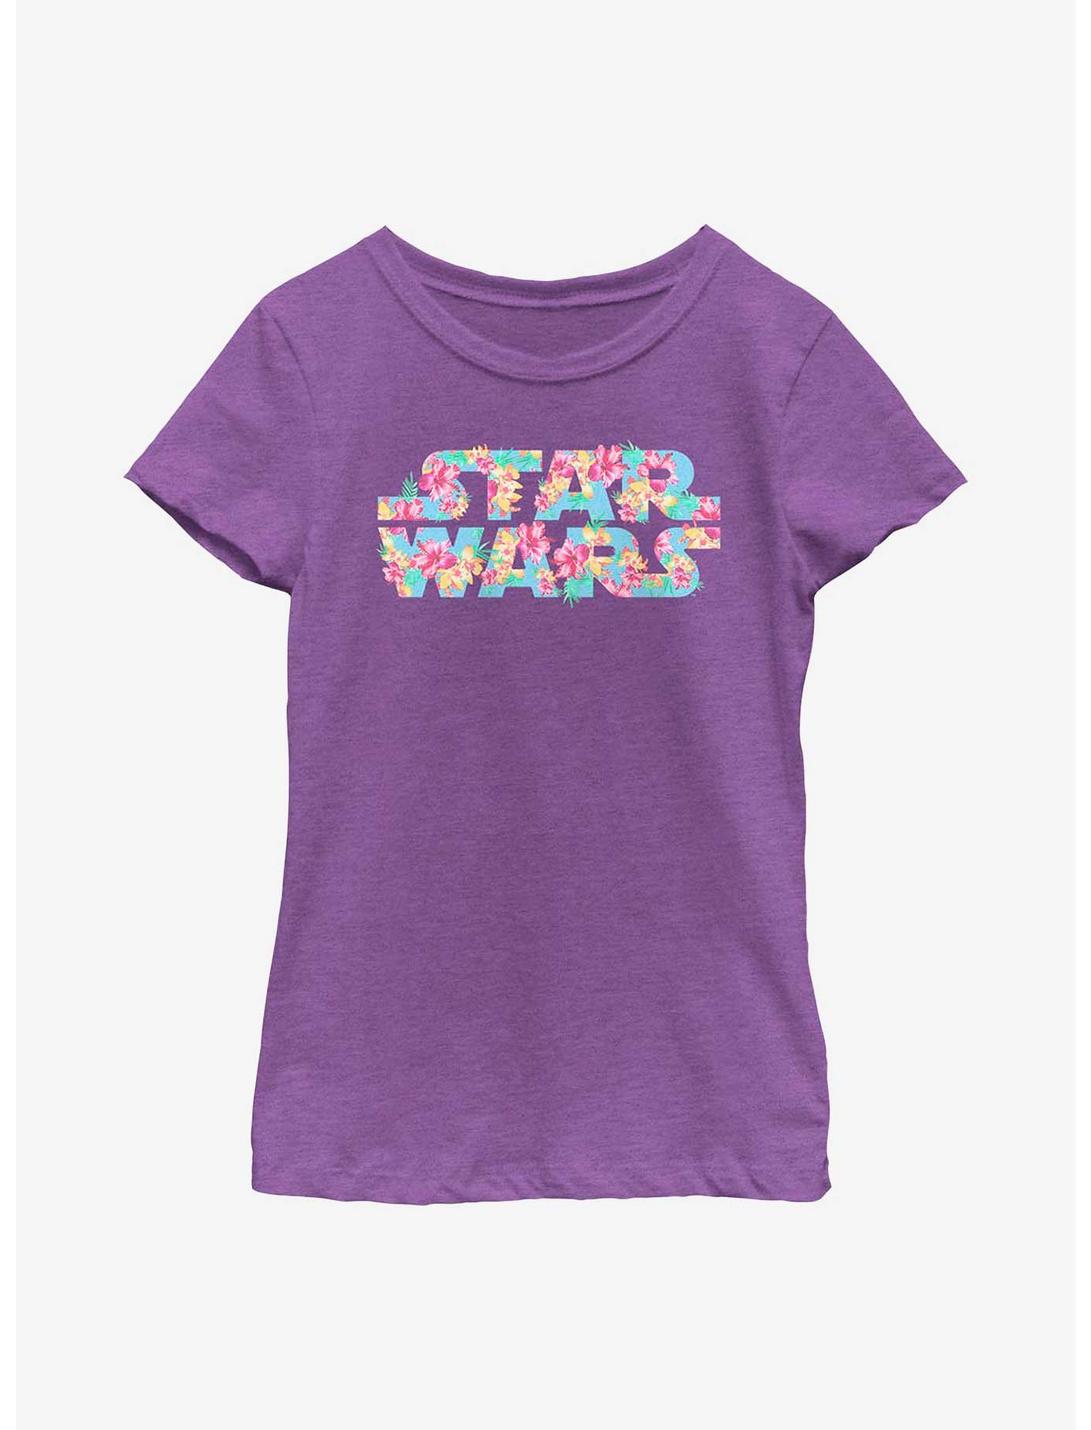 Star Wars Floral Logo Youth Girls T-Shirt, PURPLE BERRY, hi-res